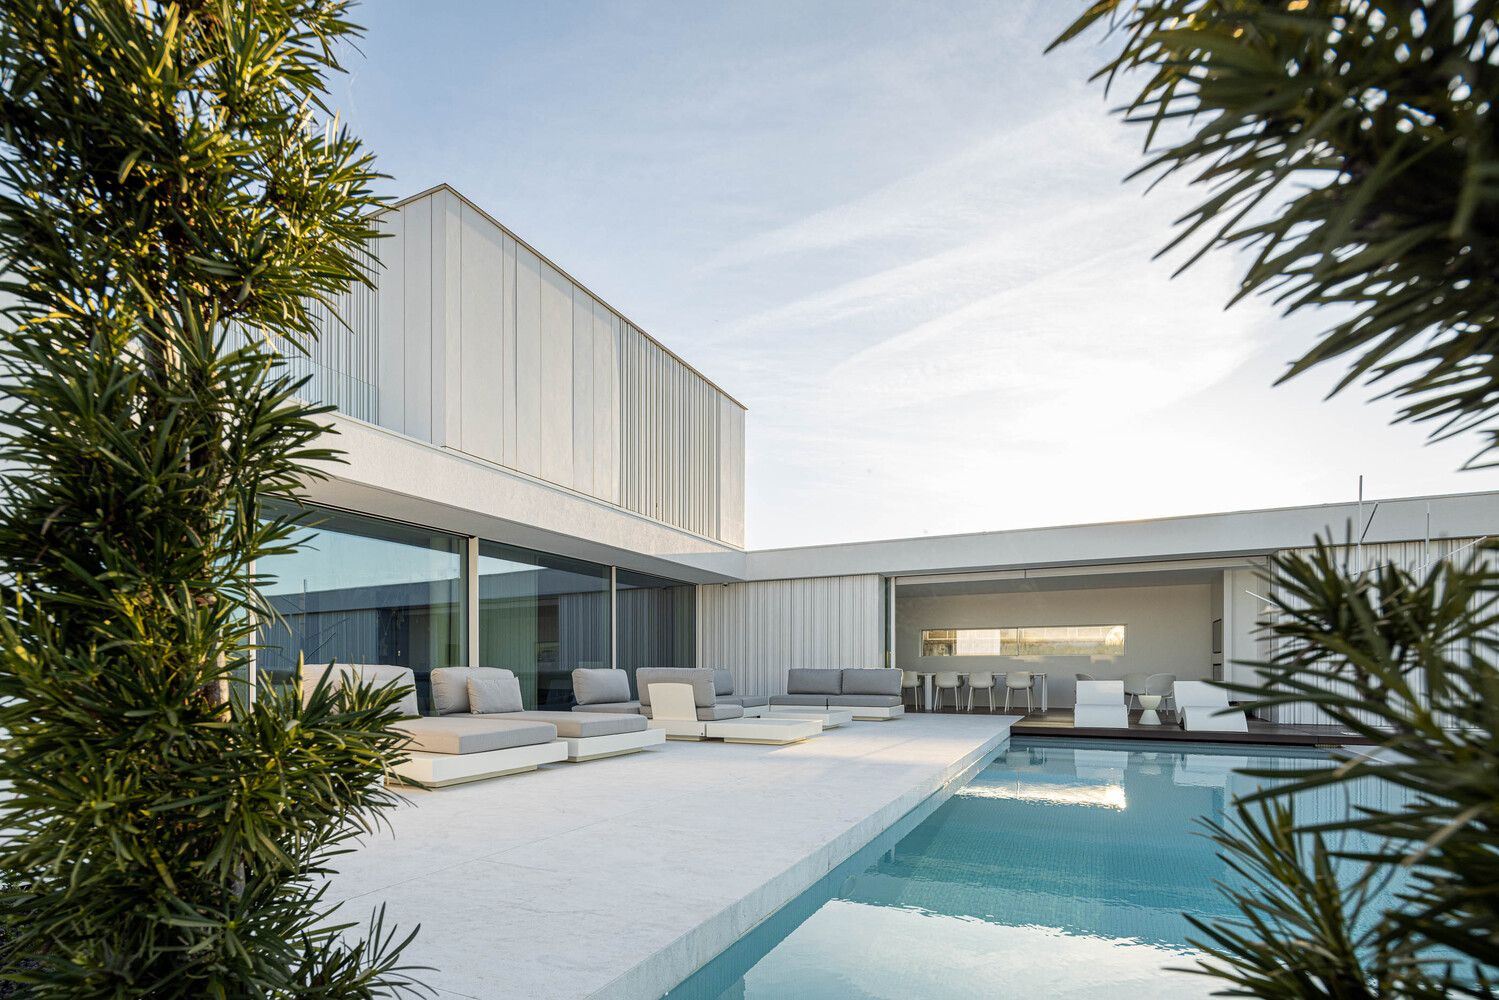 Risco White residential project in Barcelinhos, Portugal